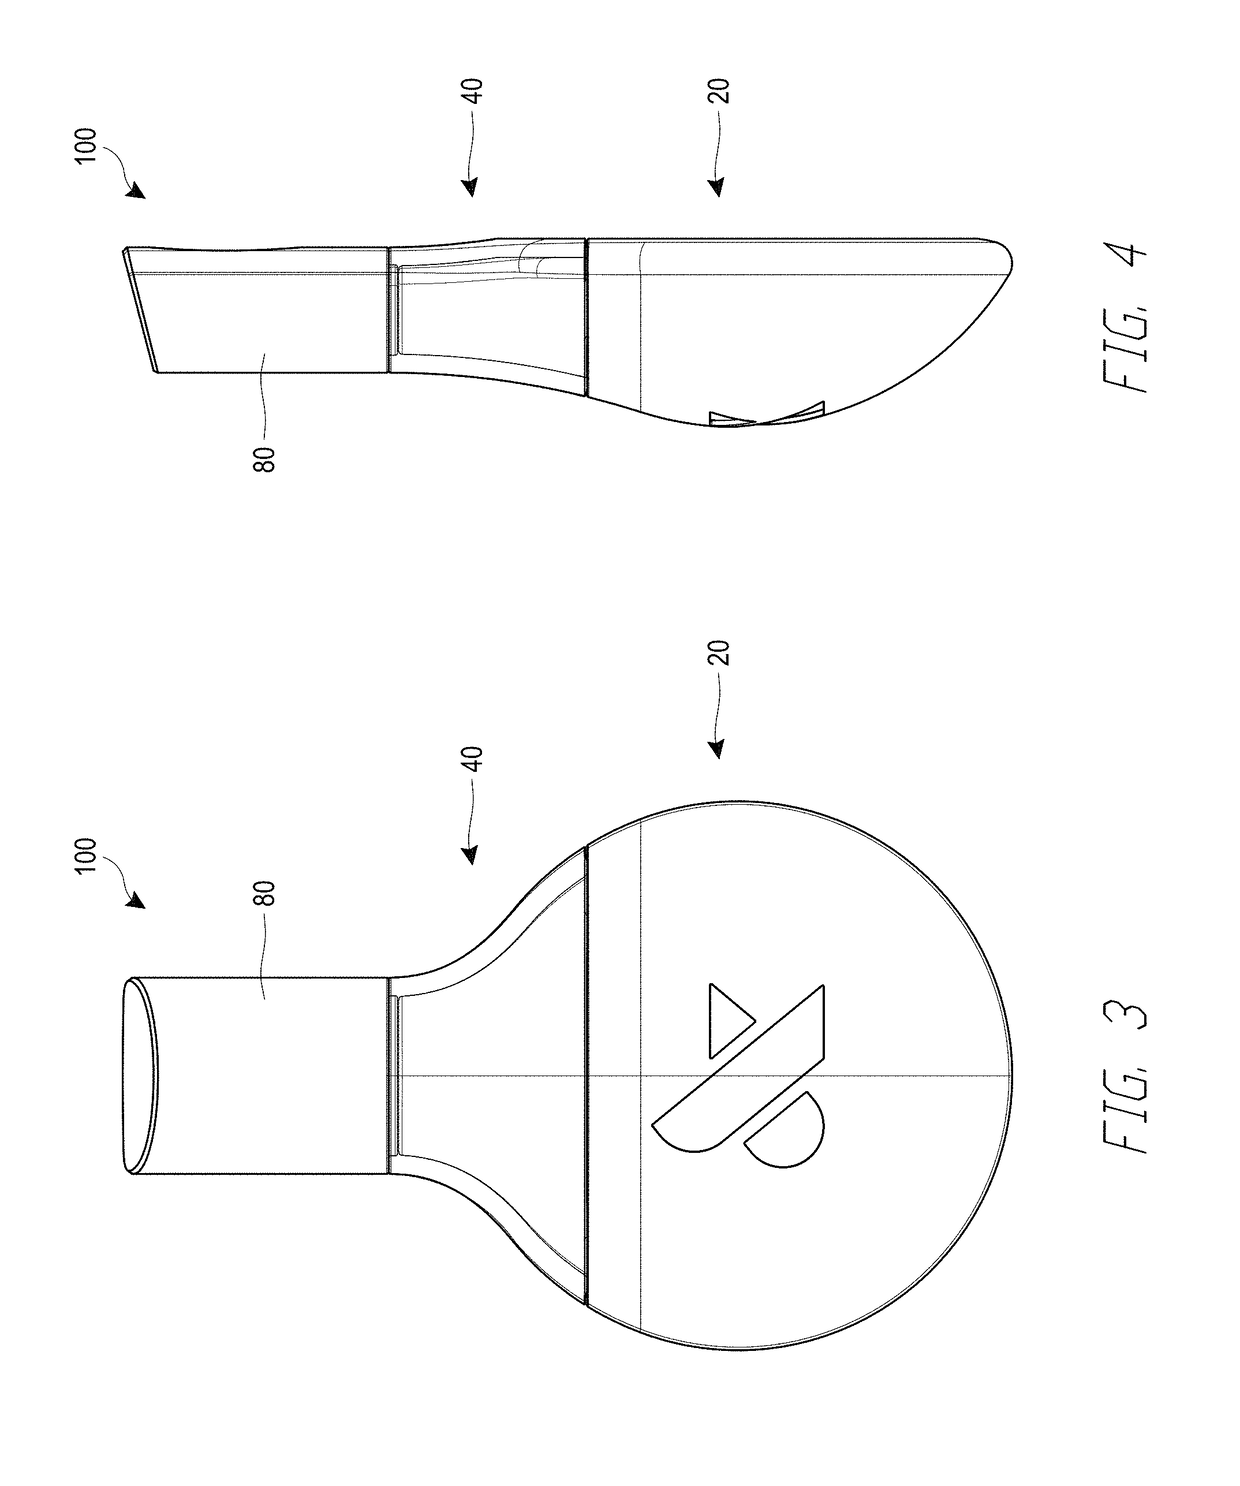 Device for applying and removing nail polish